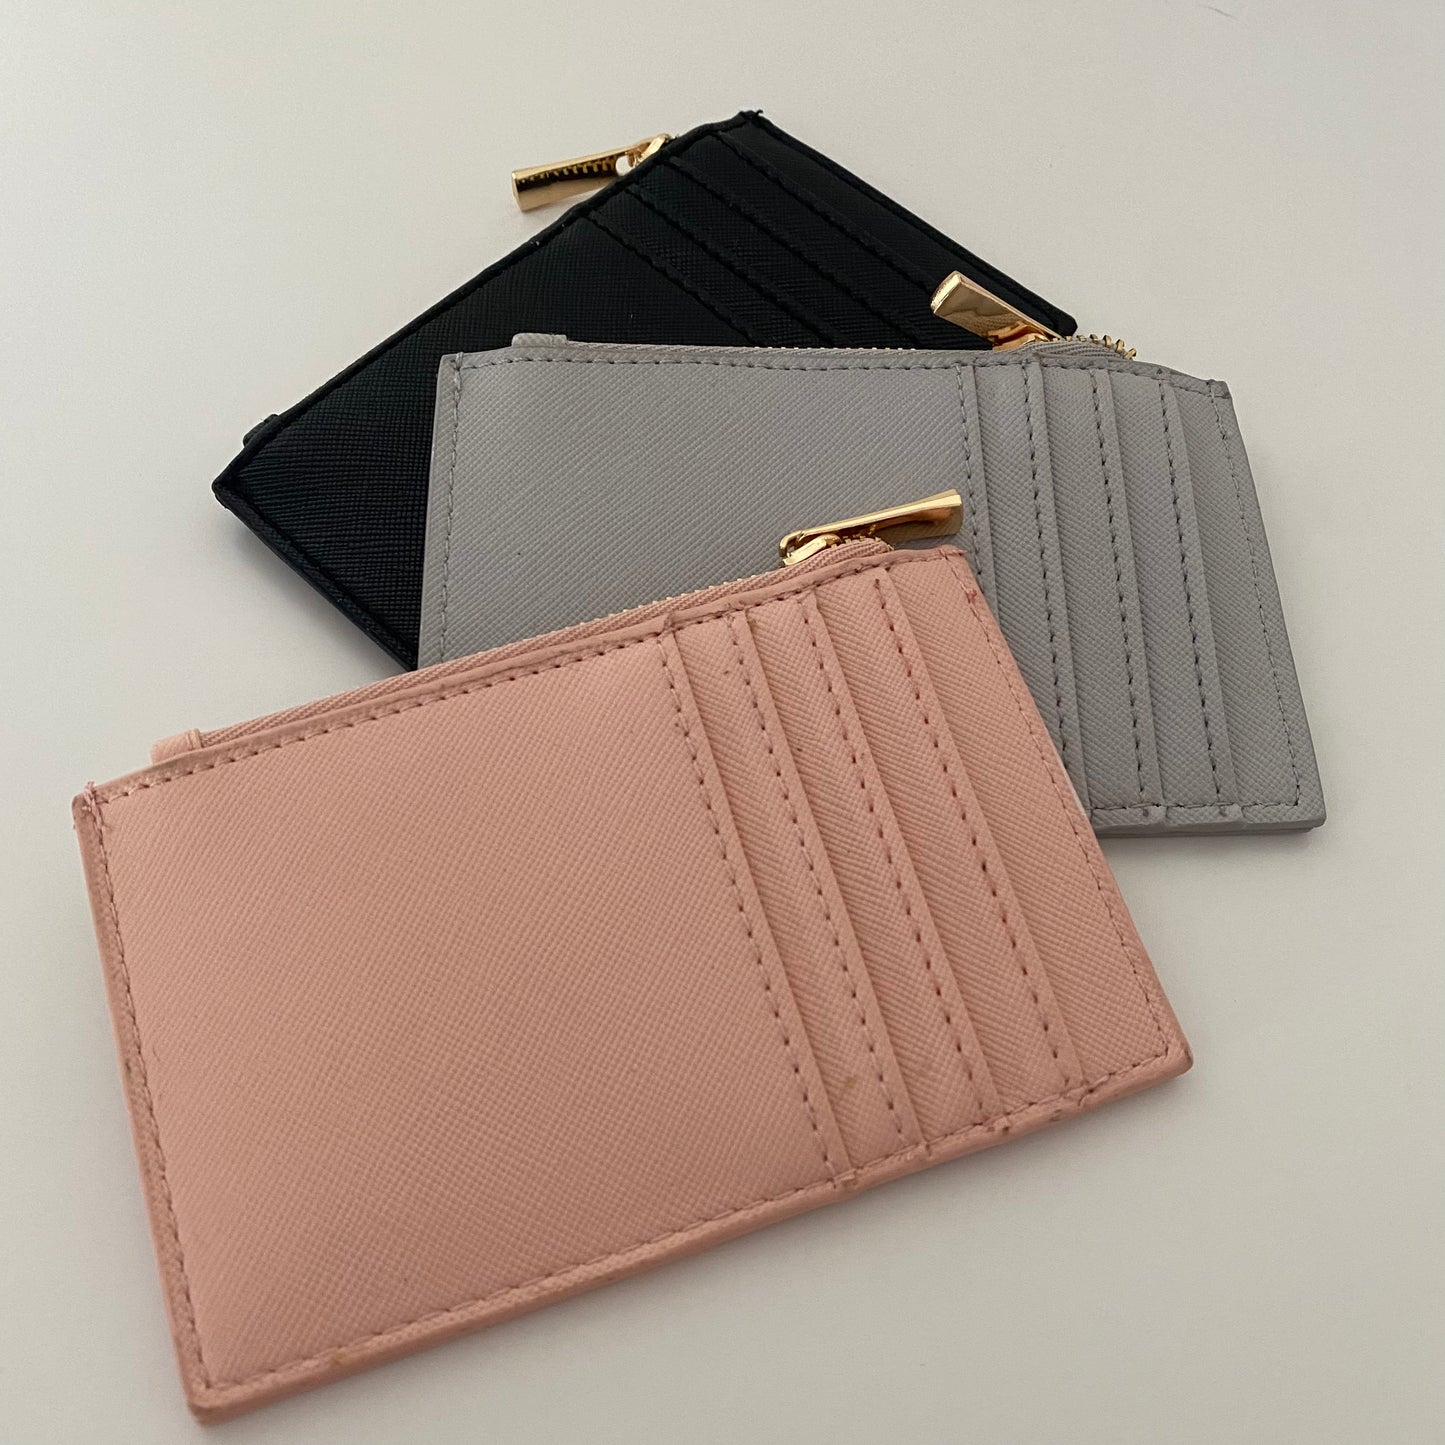 Personalised Saffiano Leather Card Holder Wallet Purse